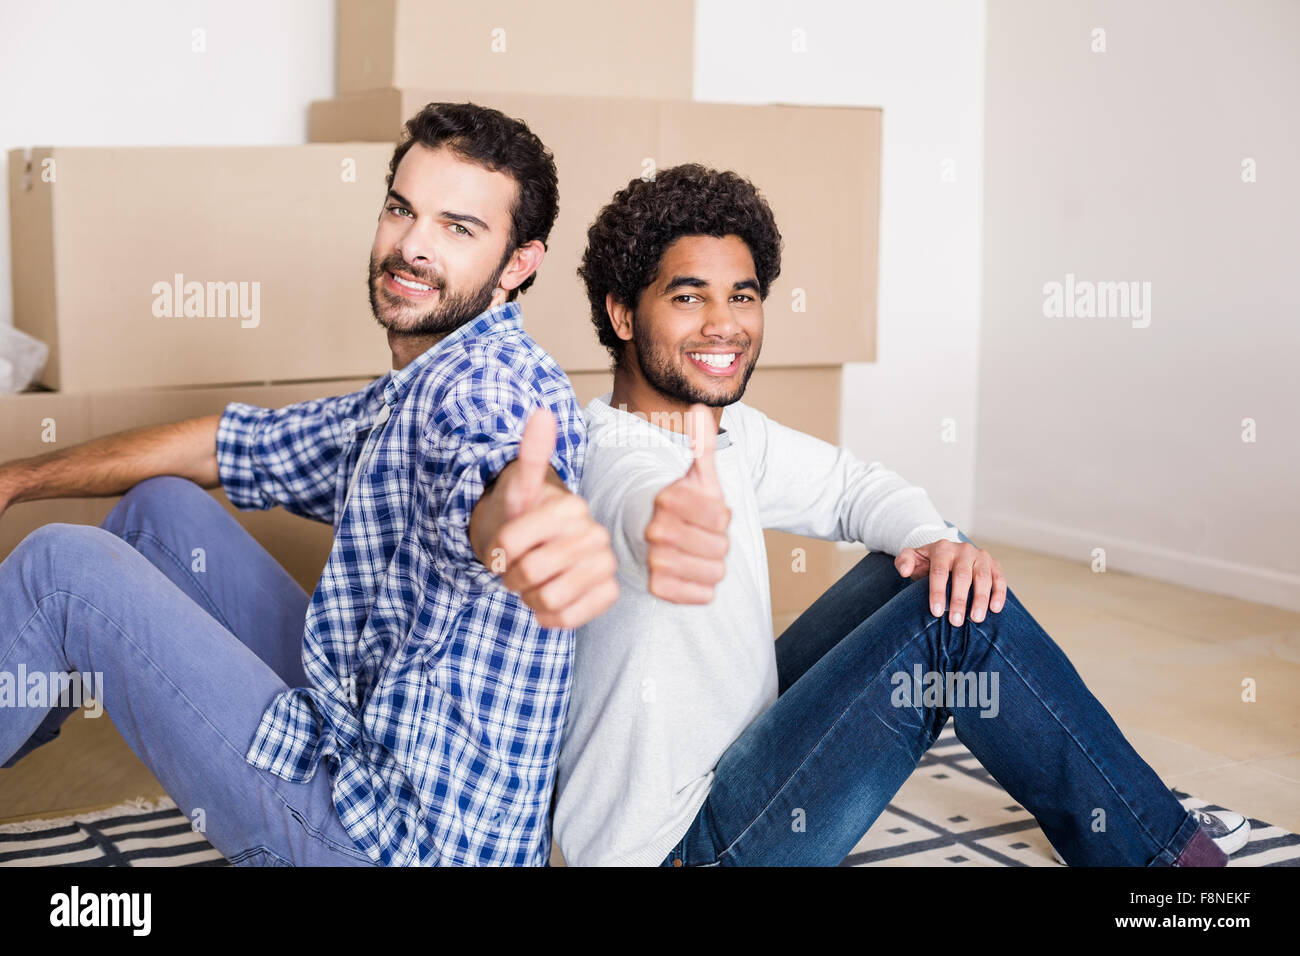 Happy gay couple sitting on floor back-to-back showing thumbs up Stock Photo